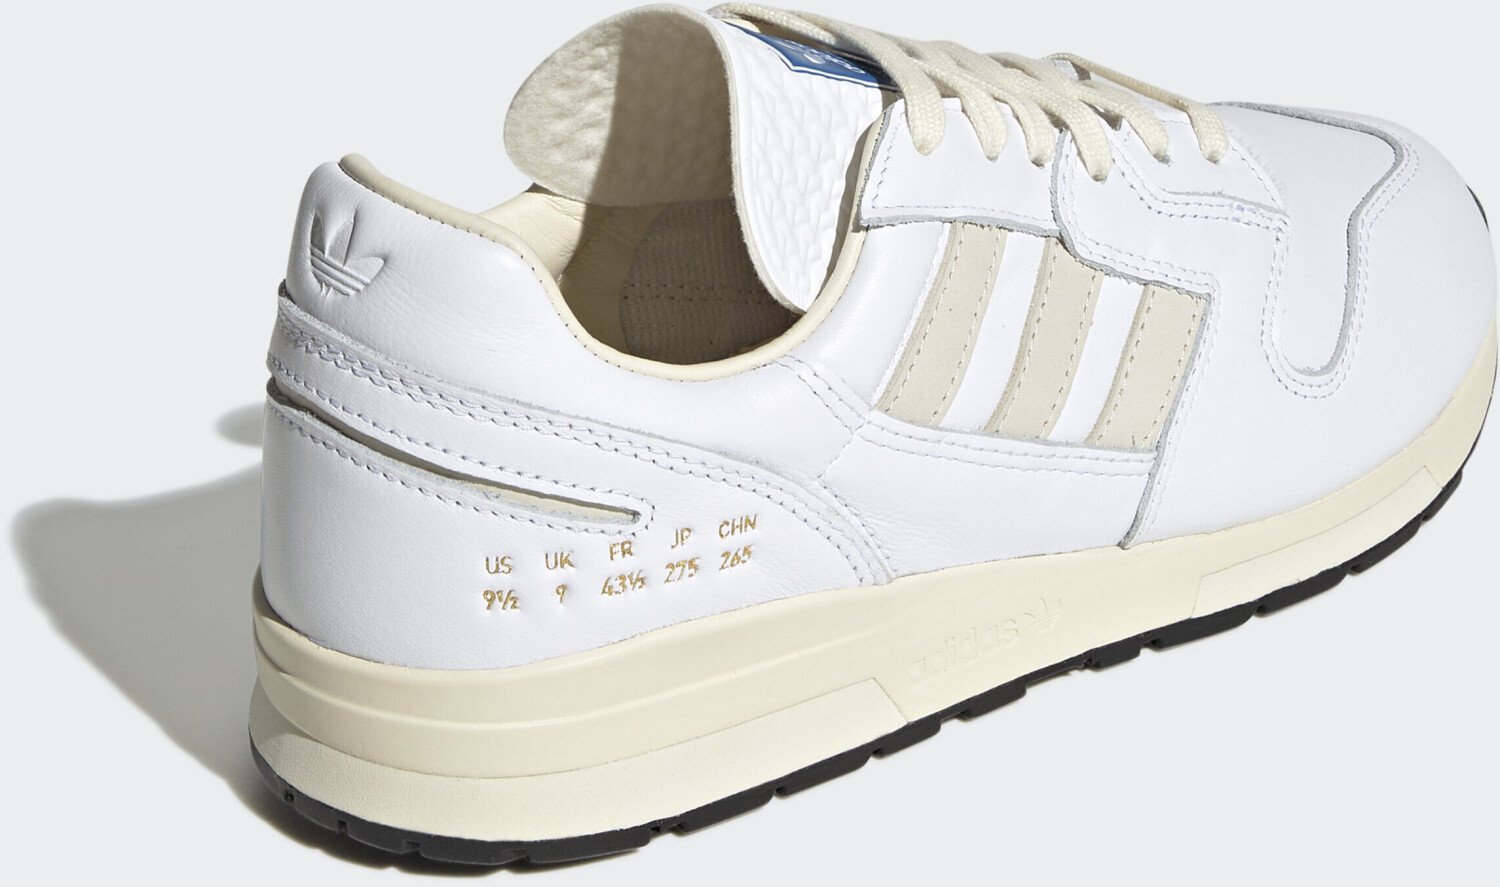 Buy Adidas ZX 420 cloud white/cream white/core black from £94.99 